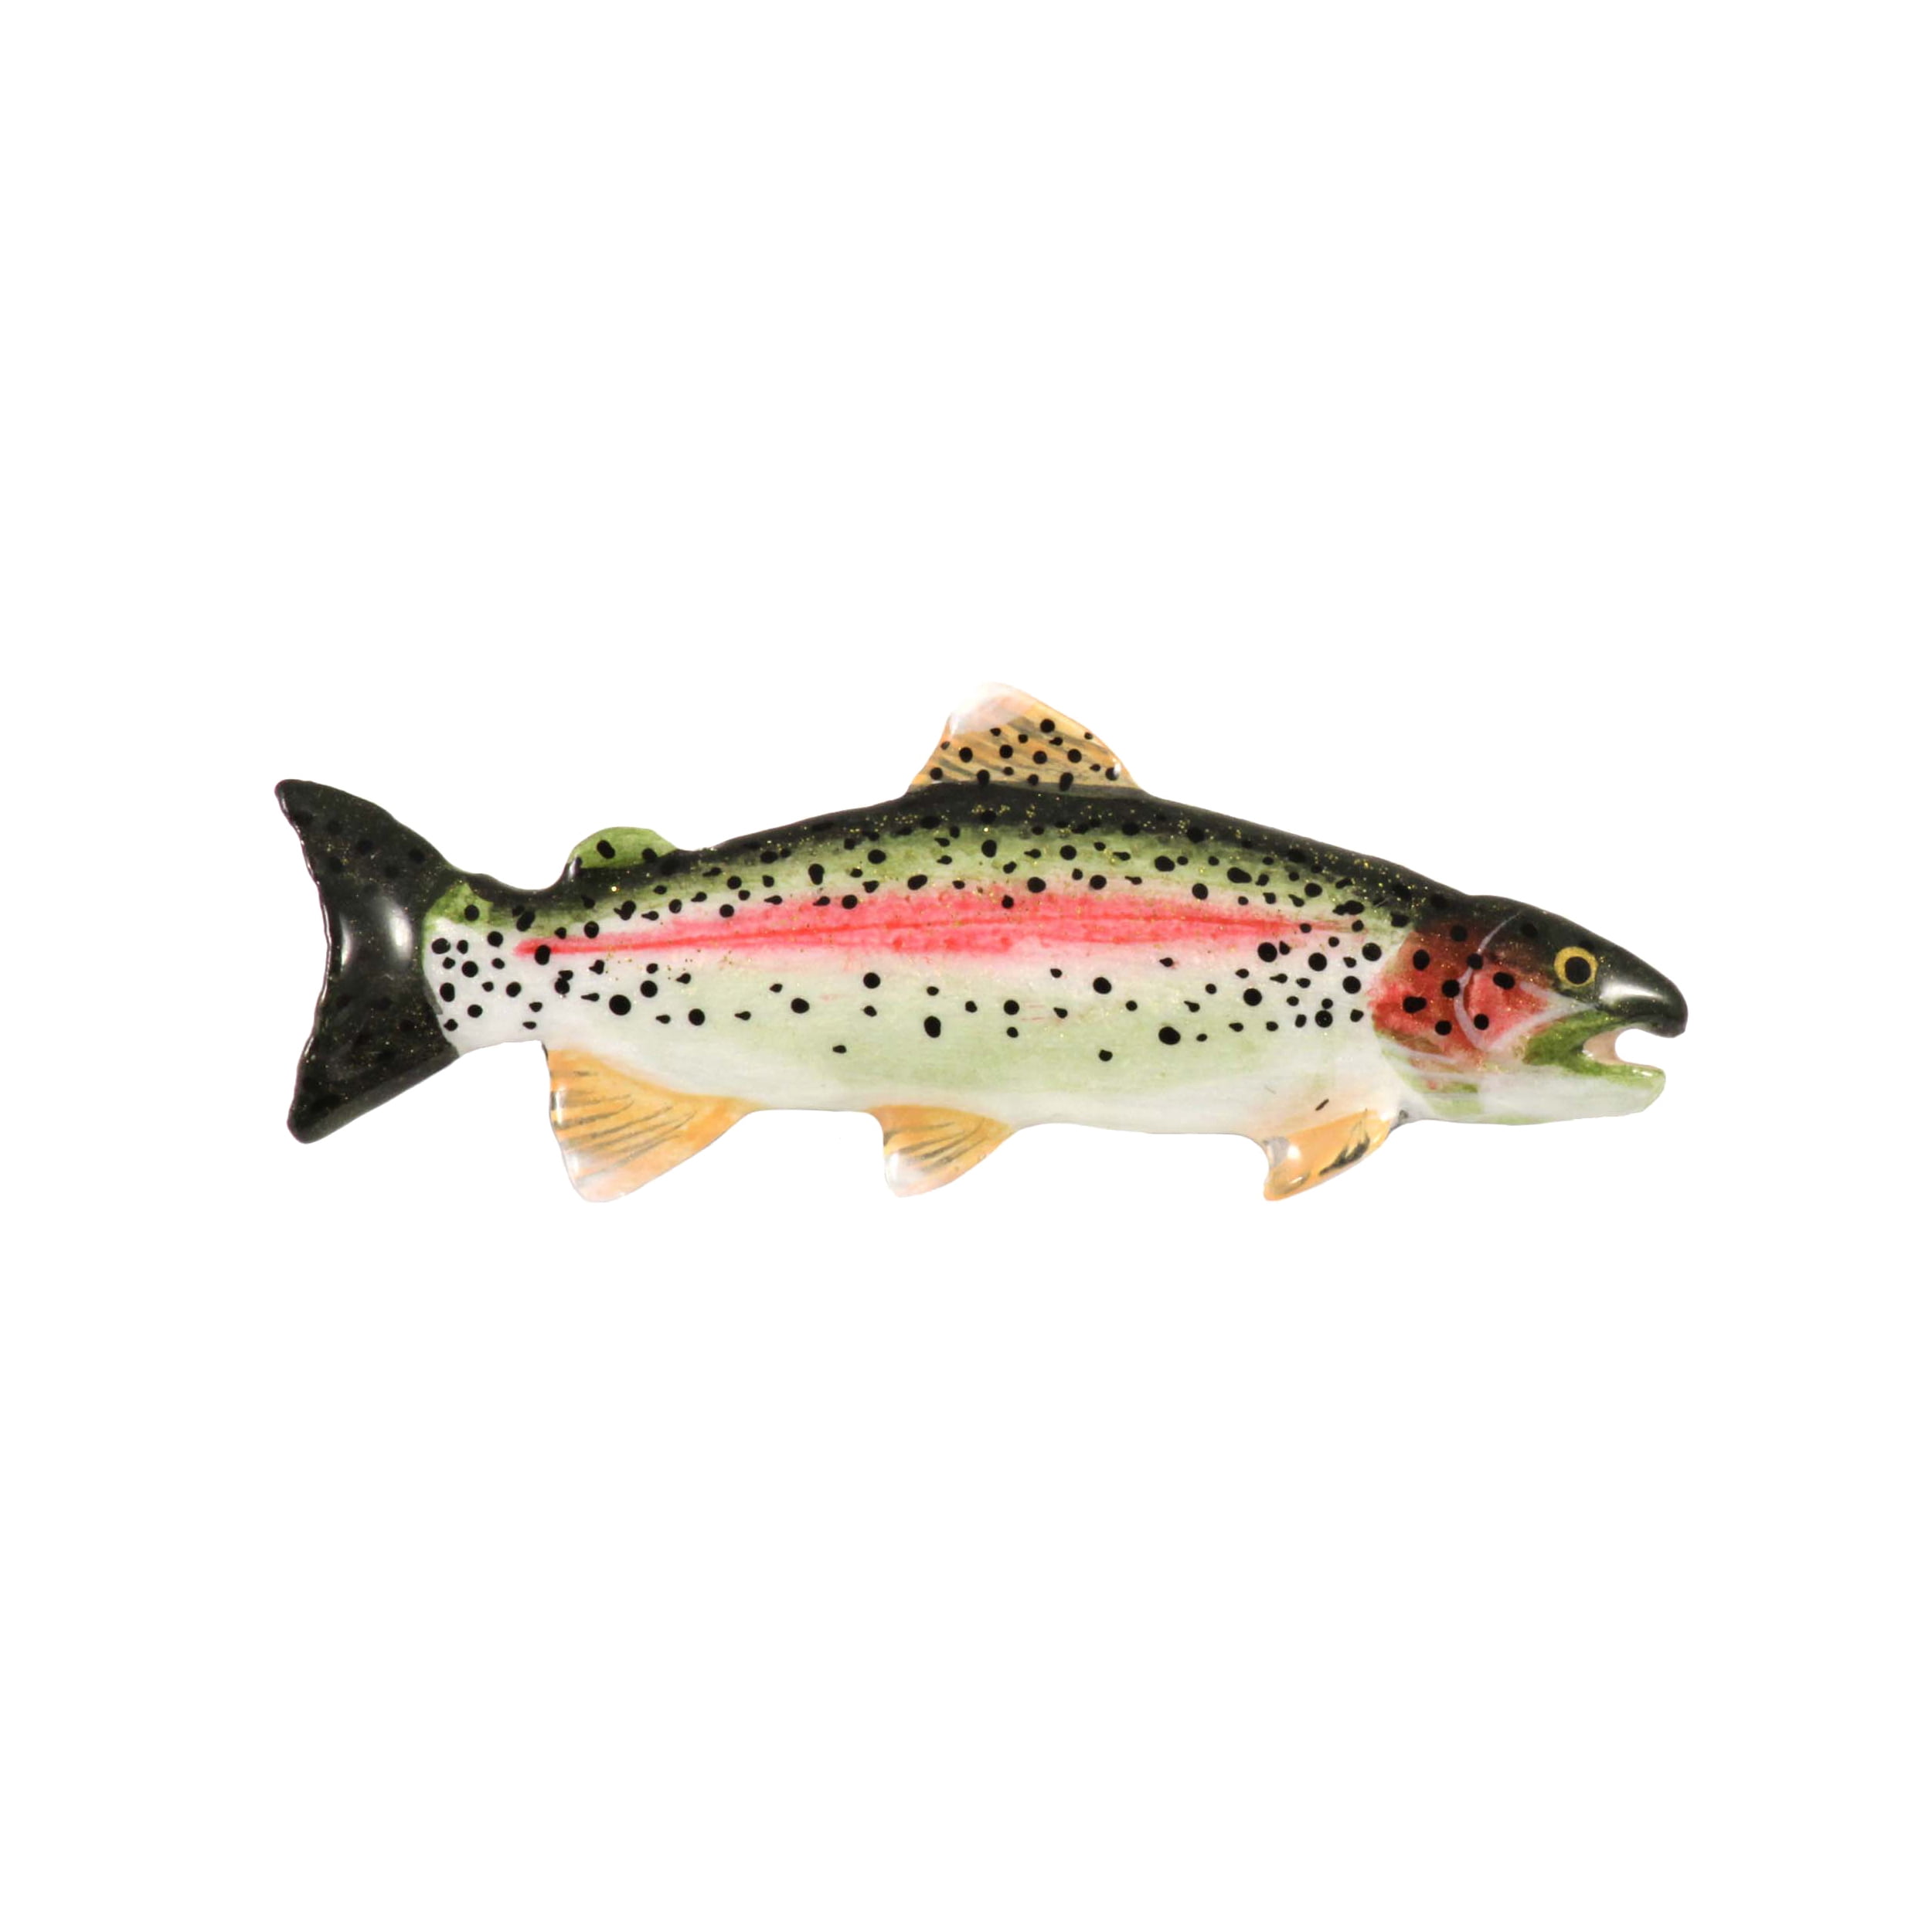 Rainbow Trout, Fish, Fishing, Hand Painted, Hat, Lapel, Pin, Brooch, Pins,  Handmade in USA. Over 200 Fish Designs Available, Creative Pewter Designs  FP001A 